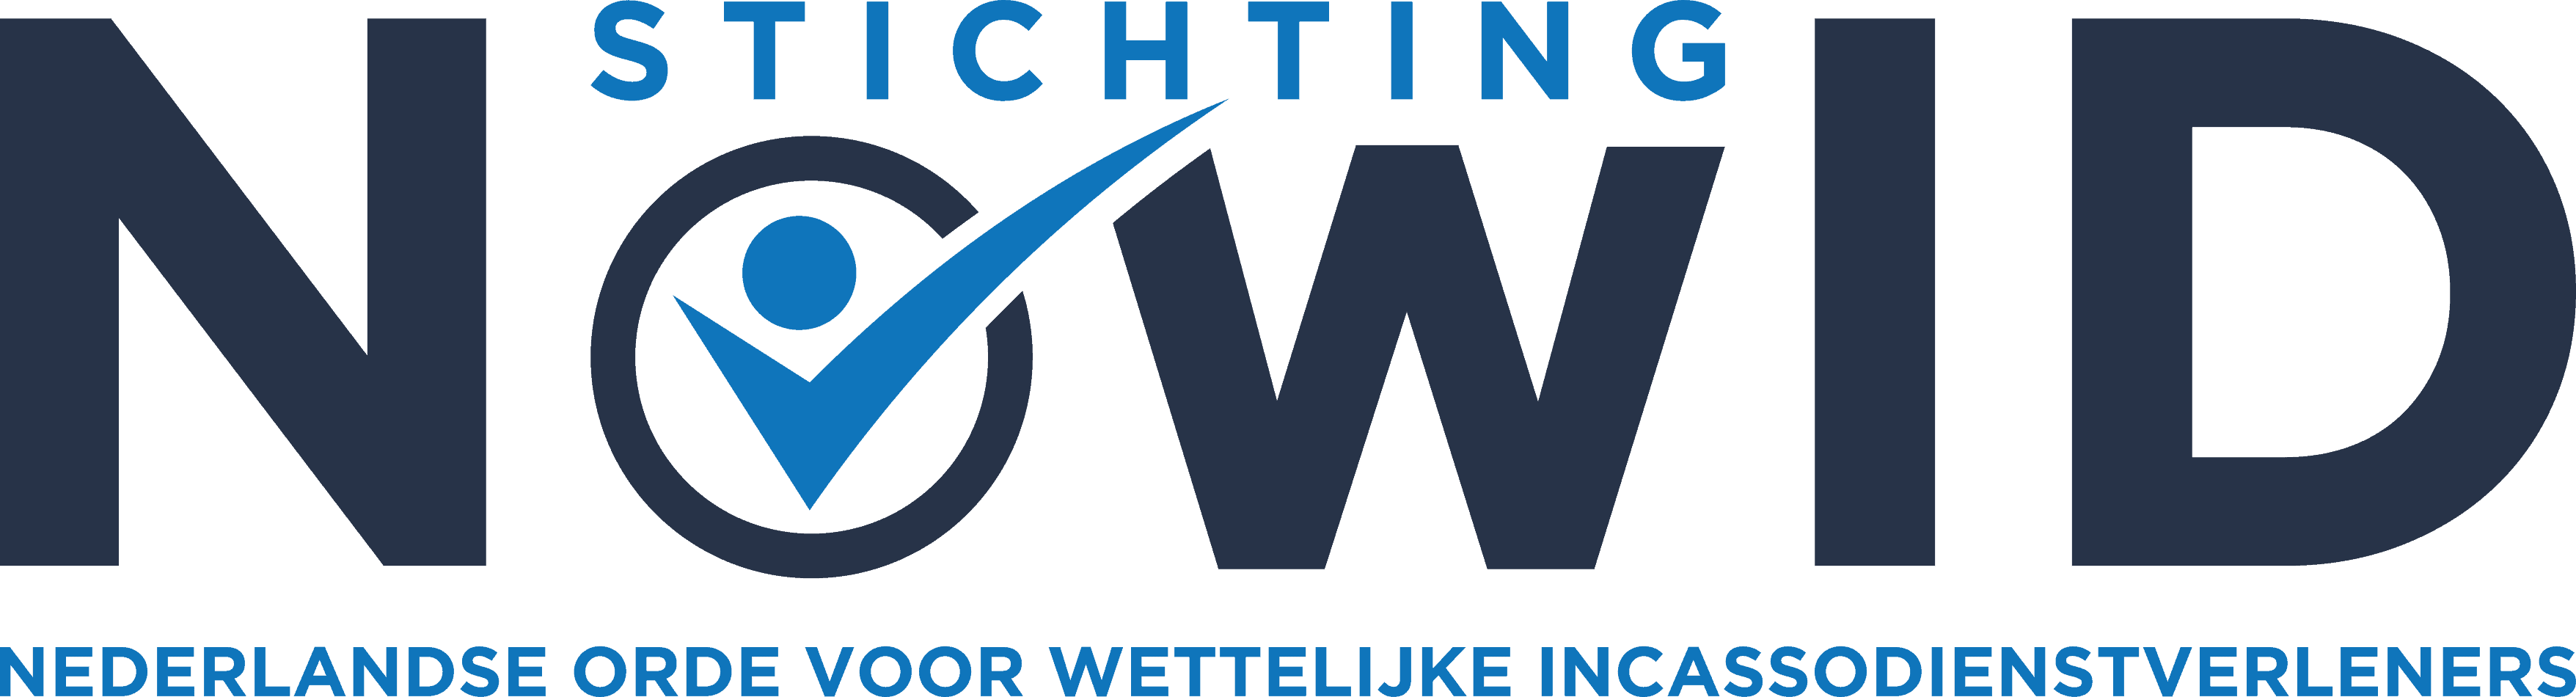 LOGO-Stichting-NowID-transparant